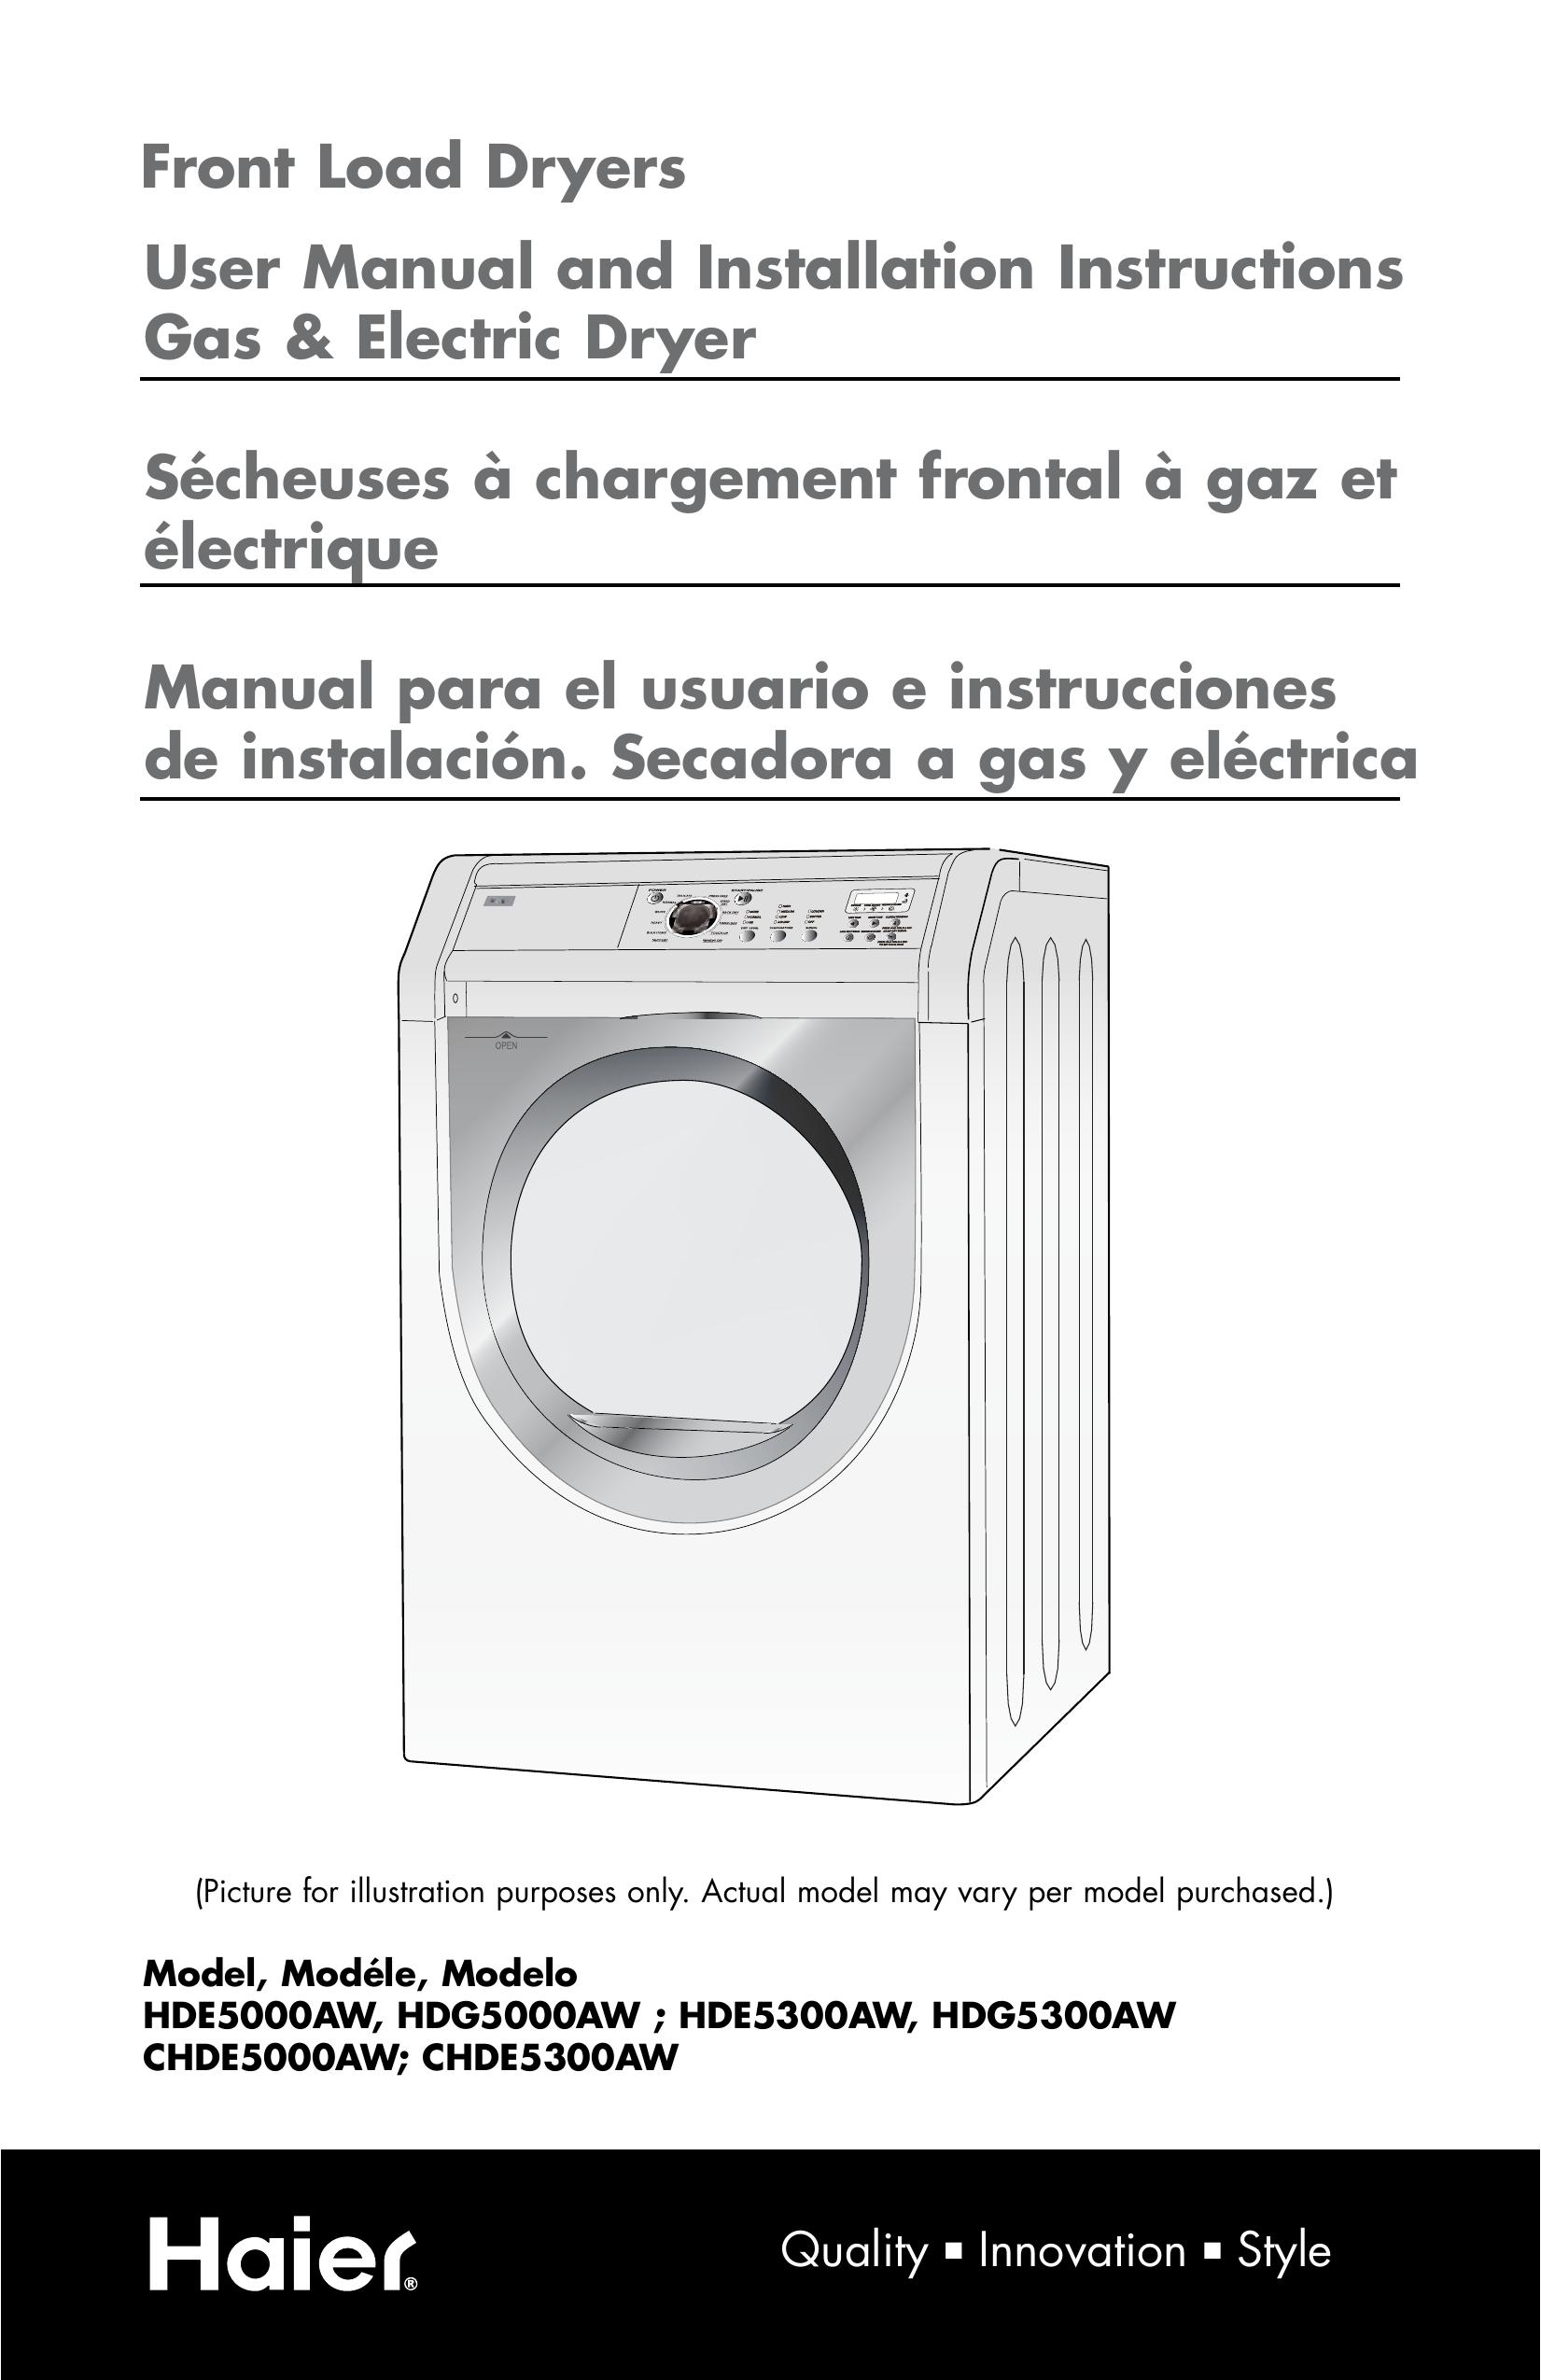 Haier HDG5300AW Clothes Dryer User Manual